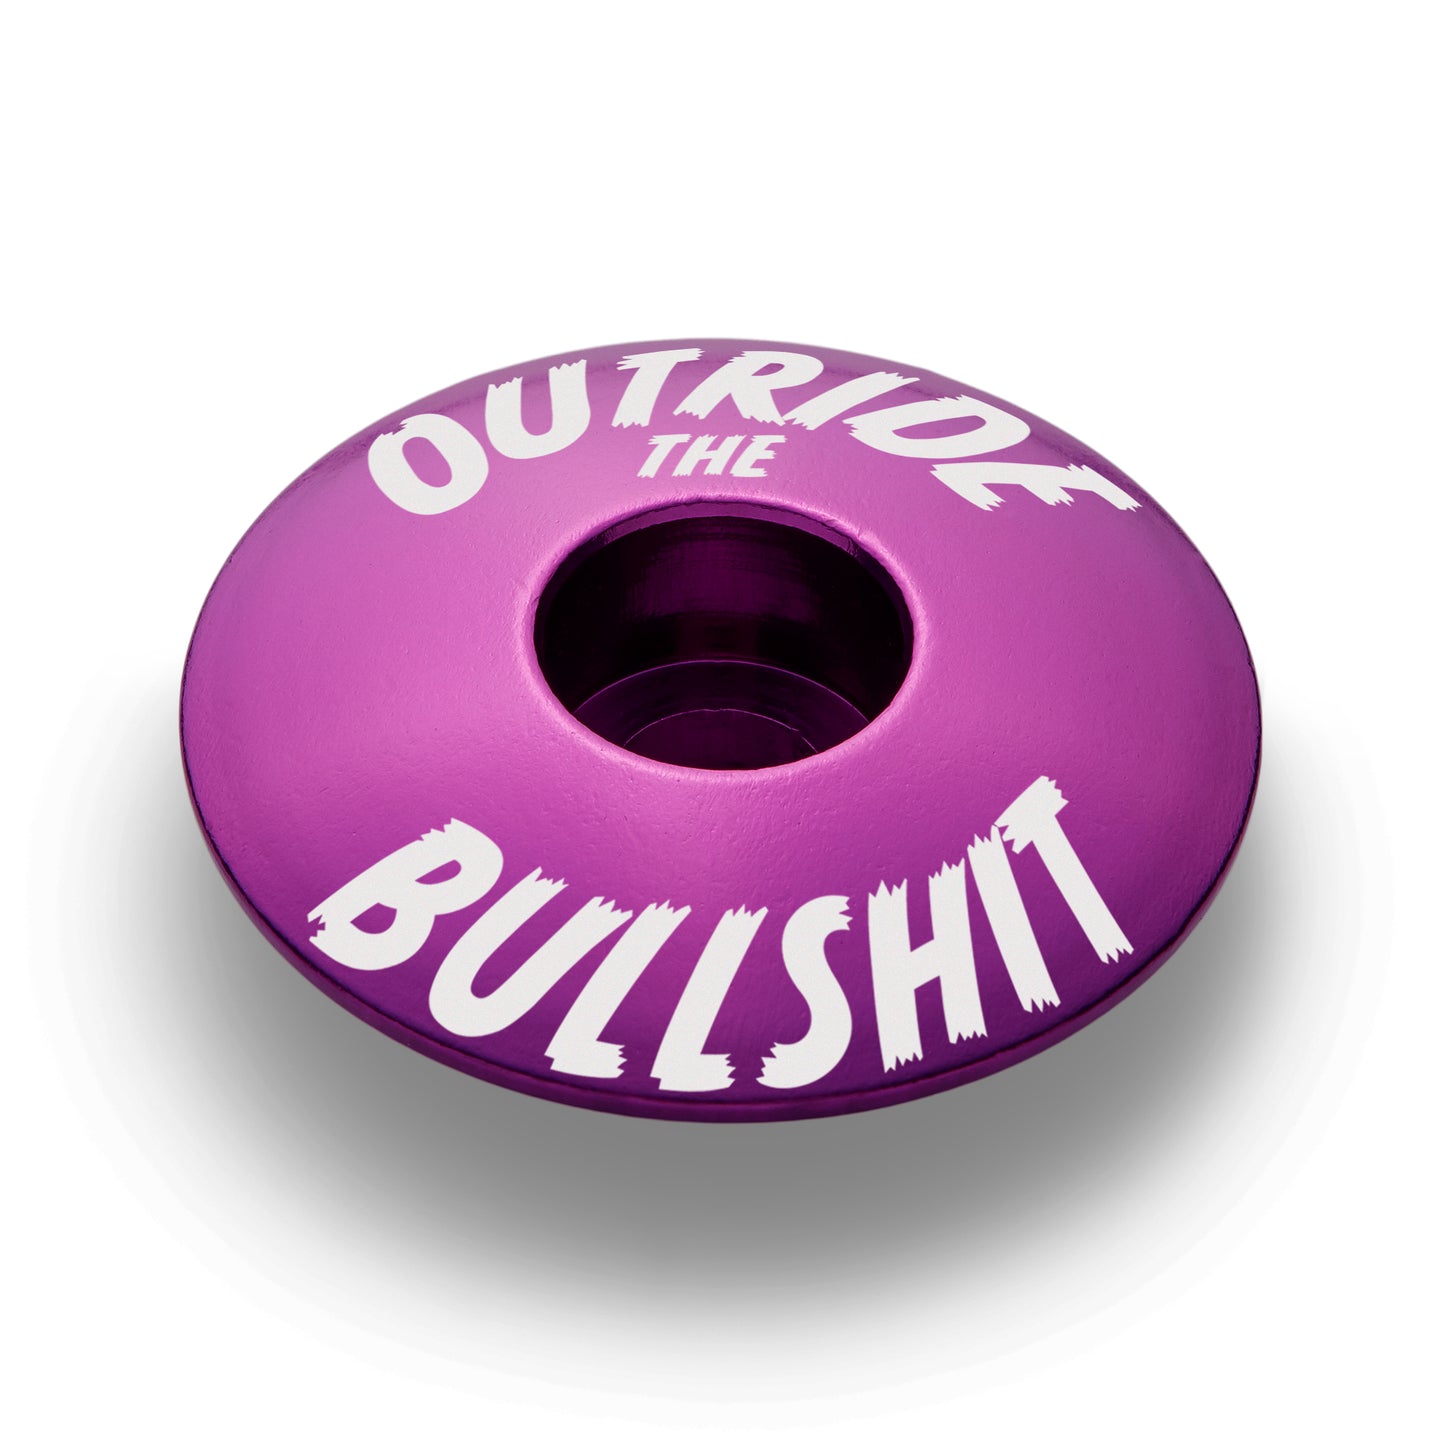 Outride The Bullshit Bicycle Headset Cap